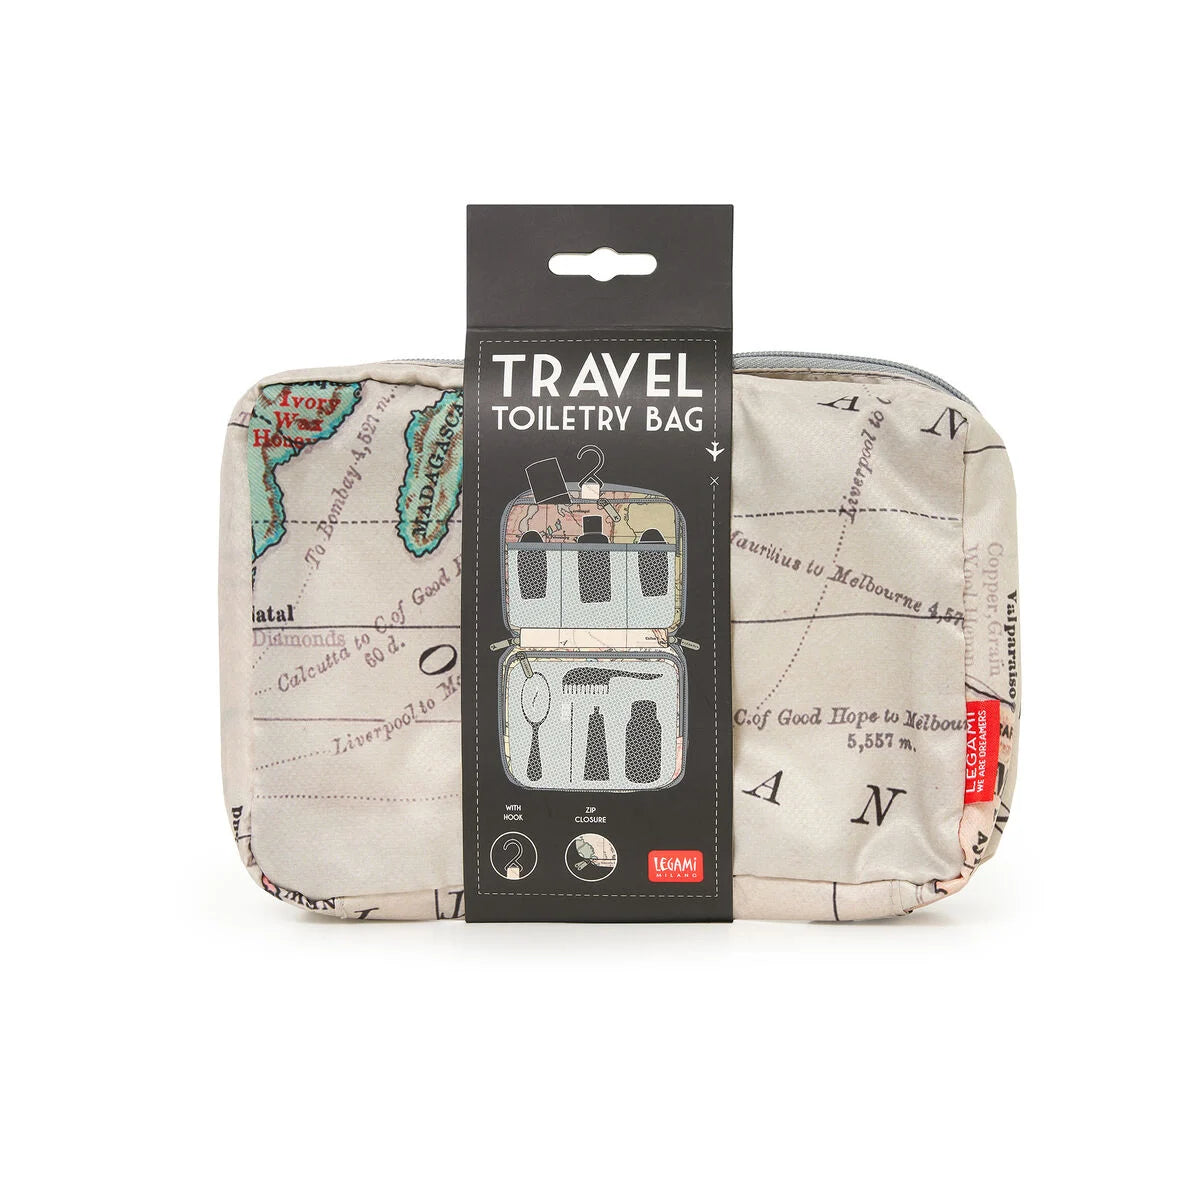 Fabulous Gifts Quirky Gifts Legami Travel Toiletry Bag by Weirs of Baggot Street